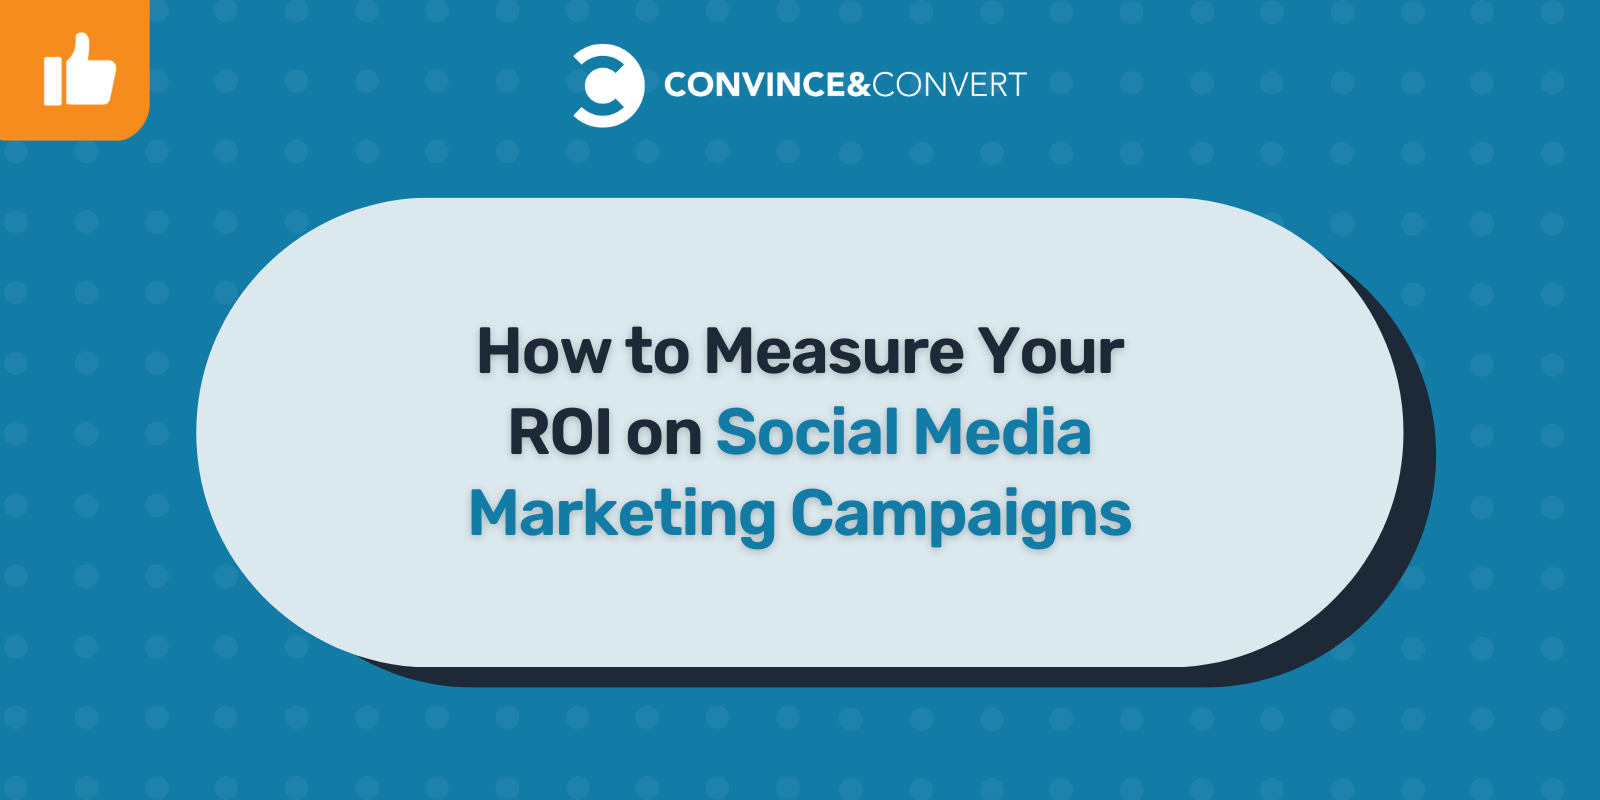 You are currently viewing How to Measure Your ROI on Social Media Marketing Campaigns